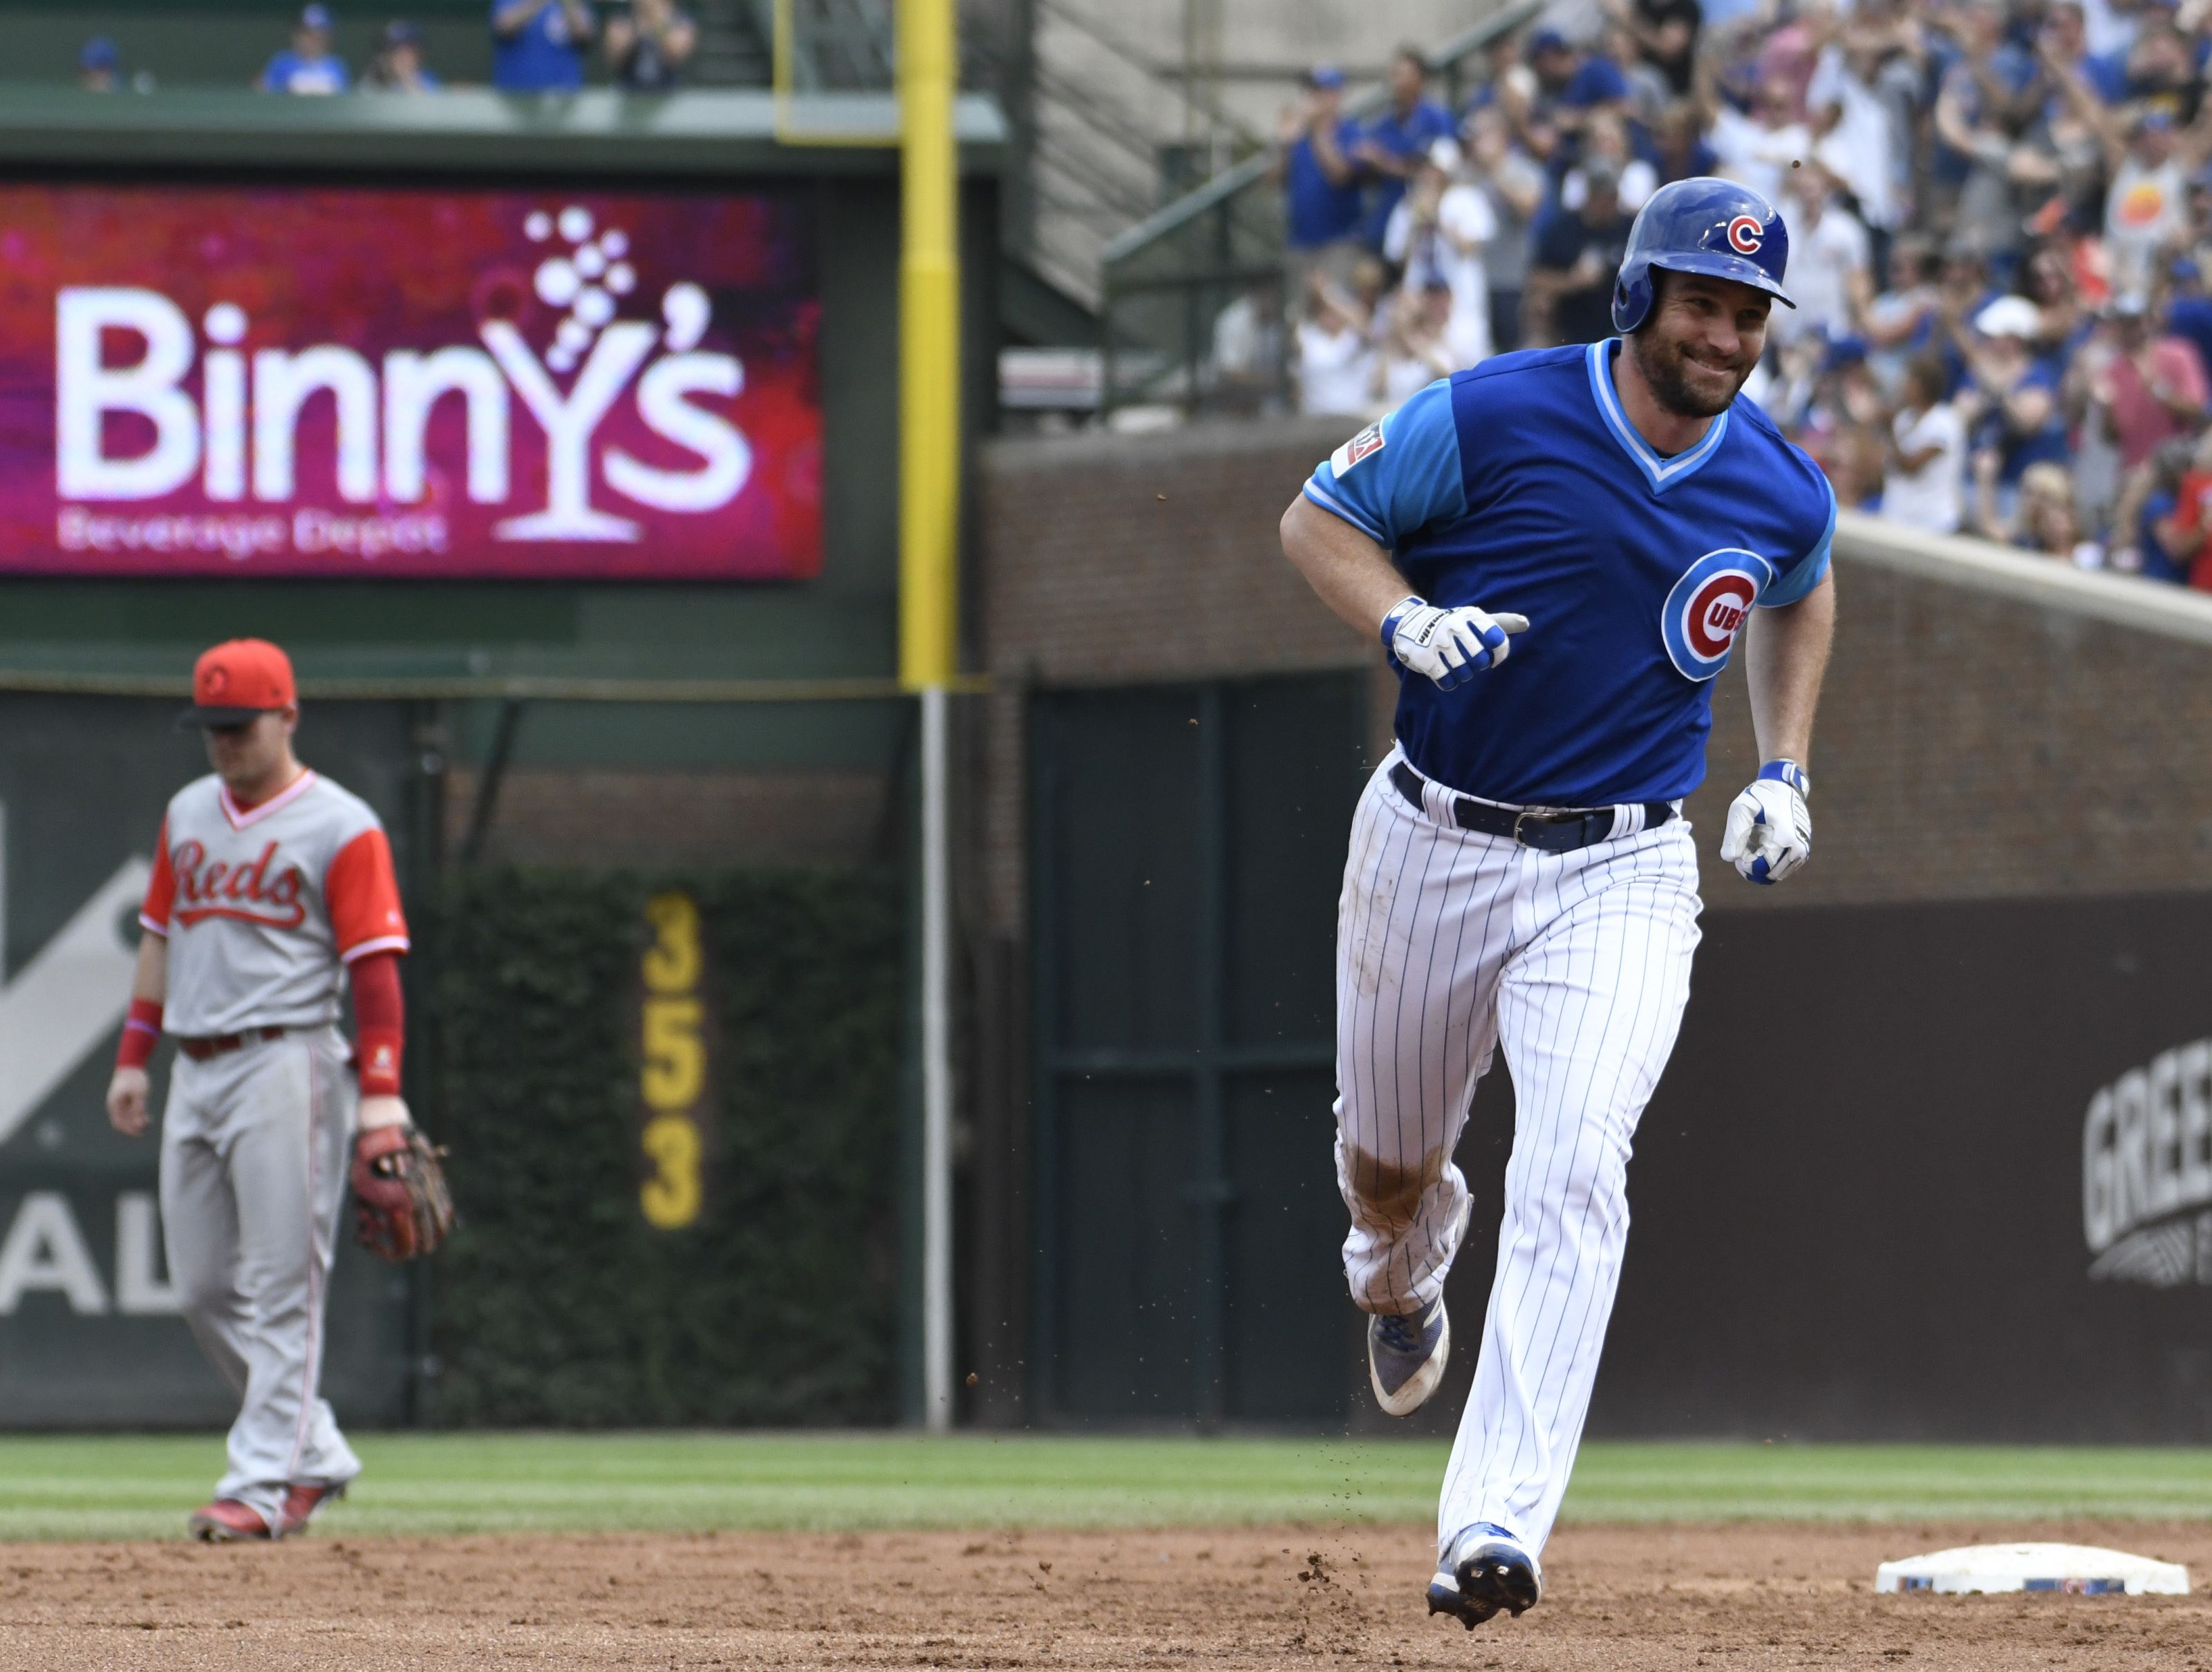 Ben Zobrist's Return Could Be The Spark The Cubs Need